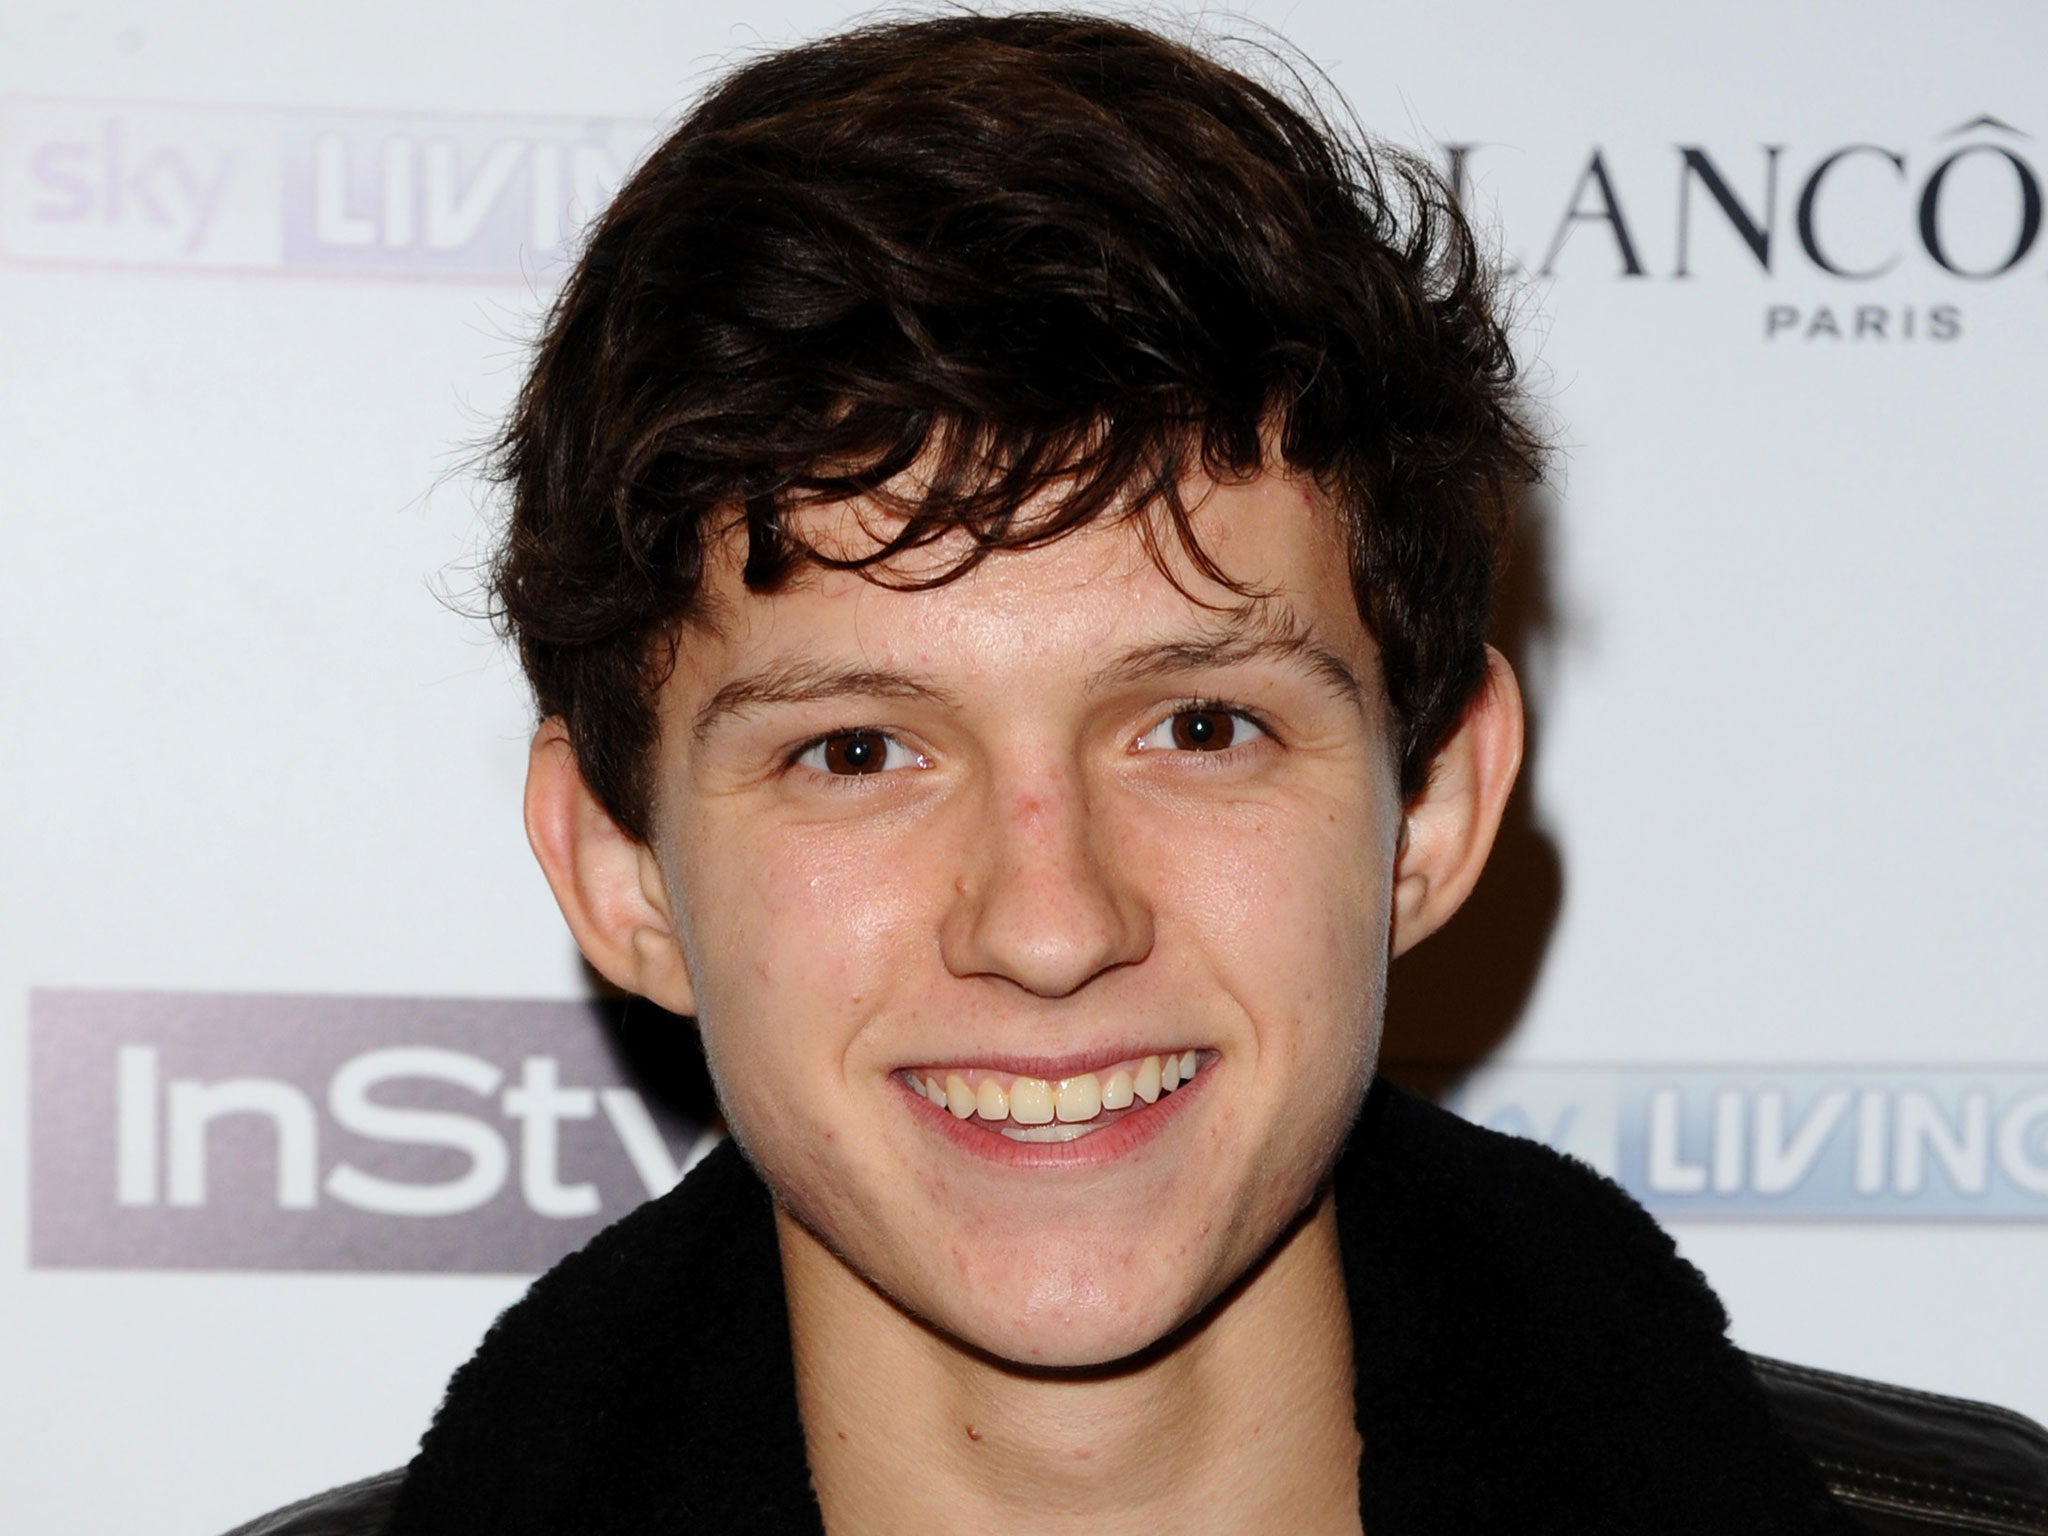 Tom Holland has been named as the new Spider-Man